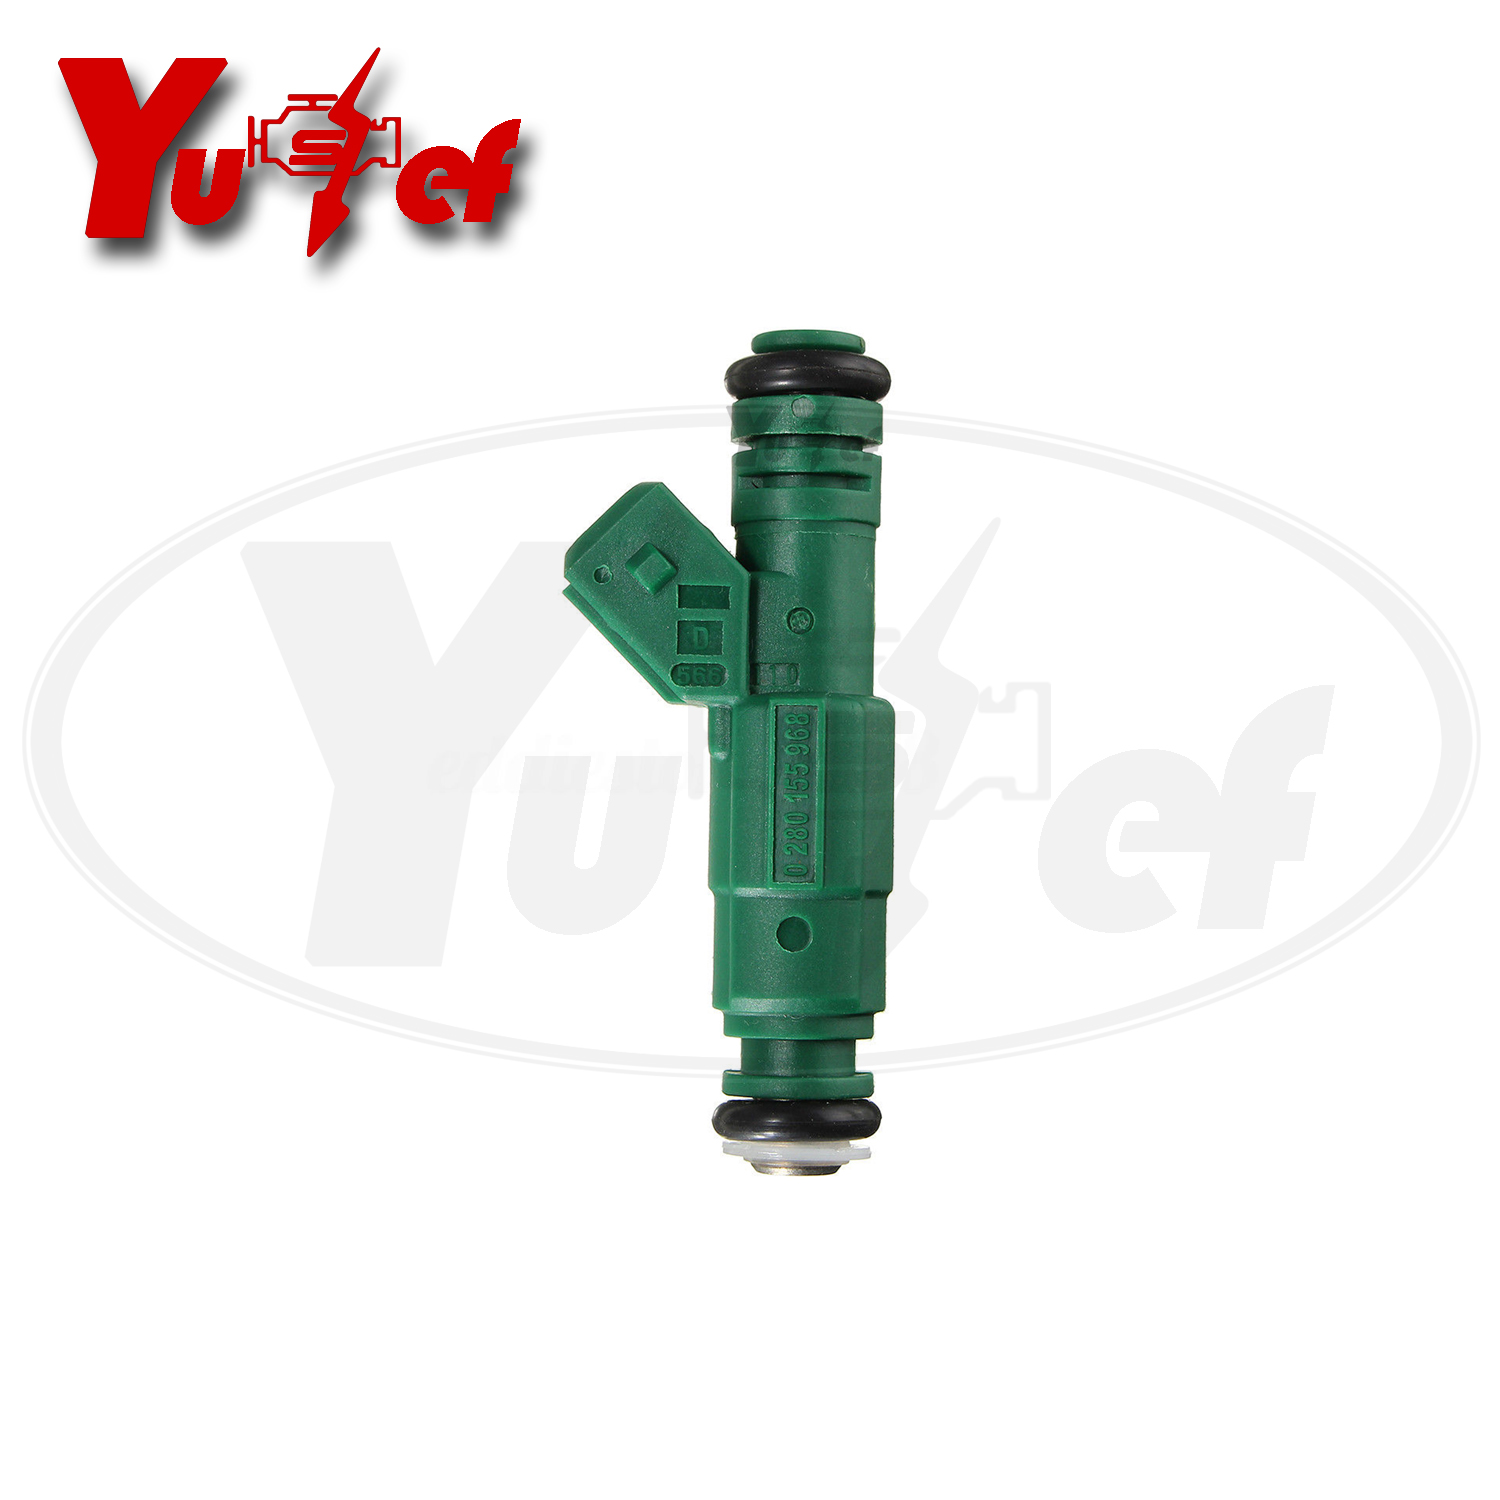 high quality fuel injector nozzle fit for C70 S60 S70 V70 0280155968 9202100